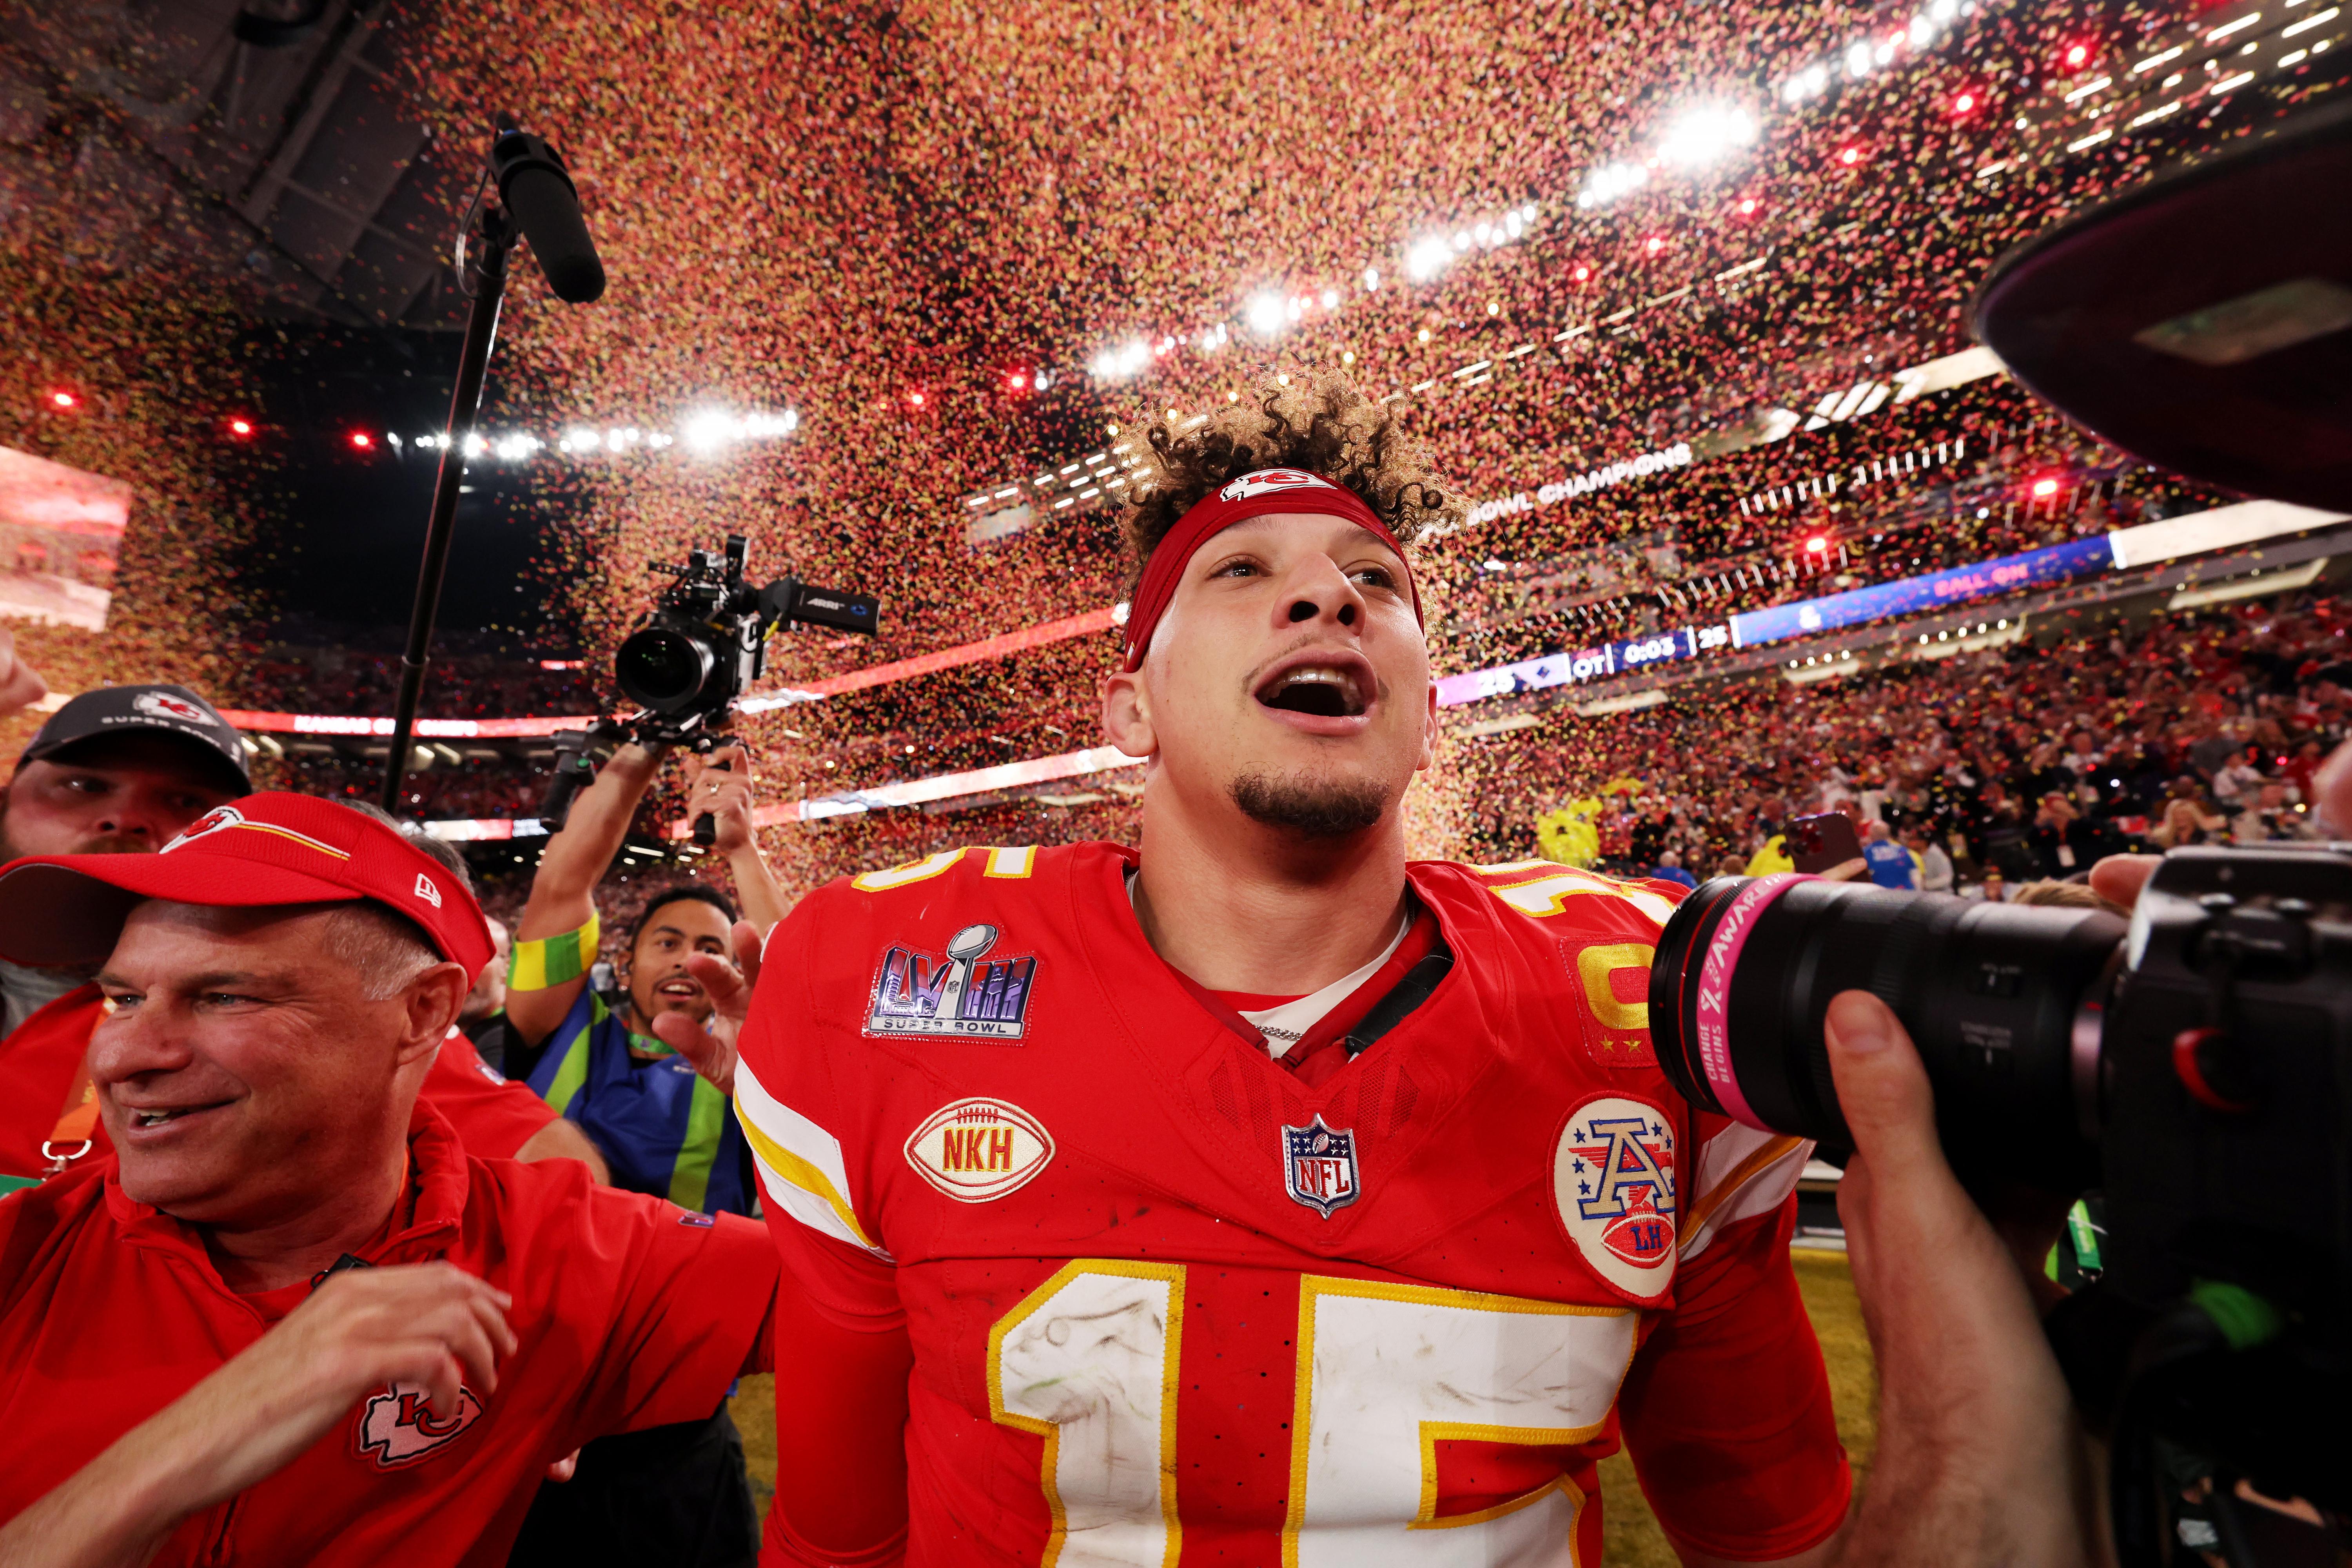 Patrick Mahomes gapes as he walks on the field, surrounded by cameras, red and yellow confetti falling behind him.